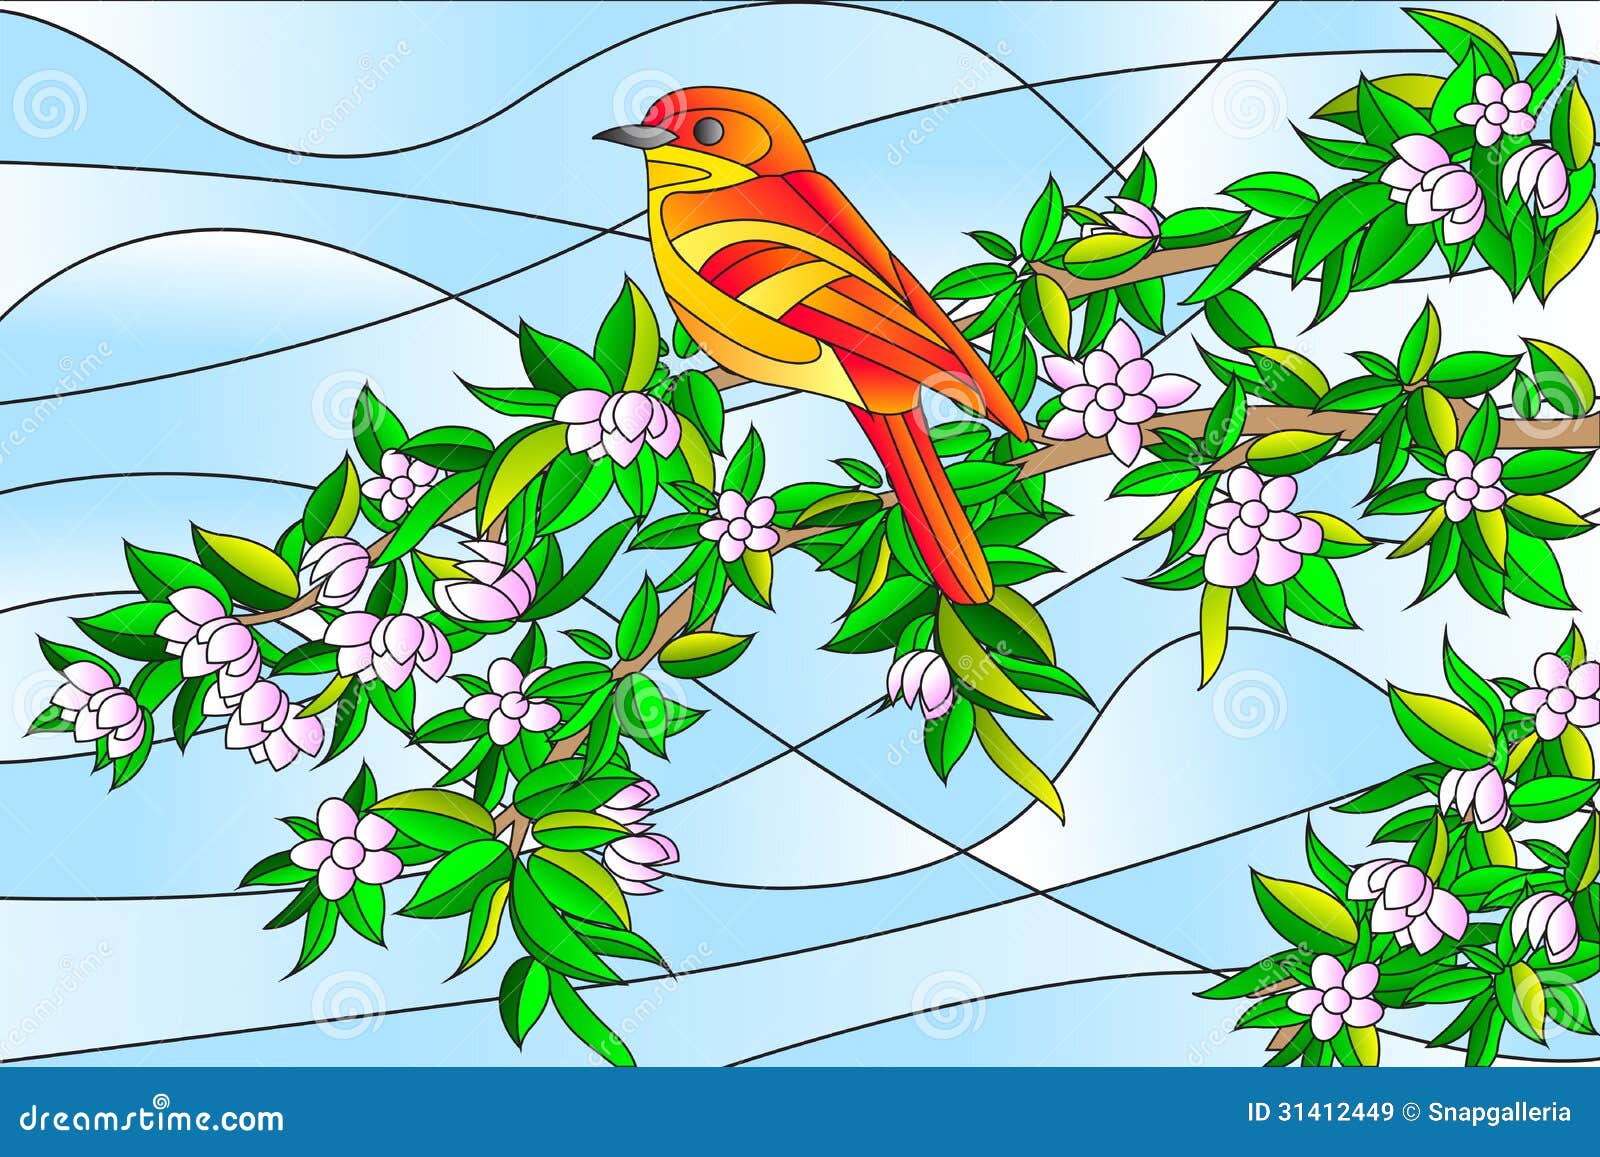 Bird Sitting on Tree Stained Glass Painting Stock Vector ...